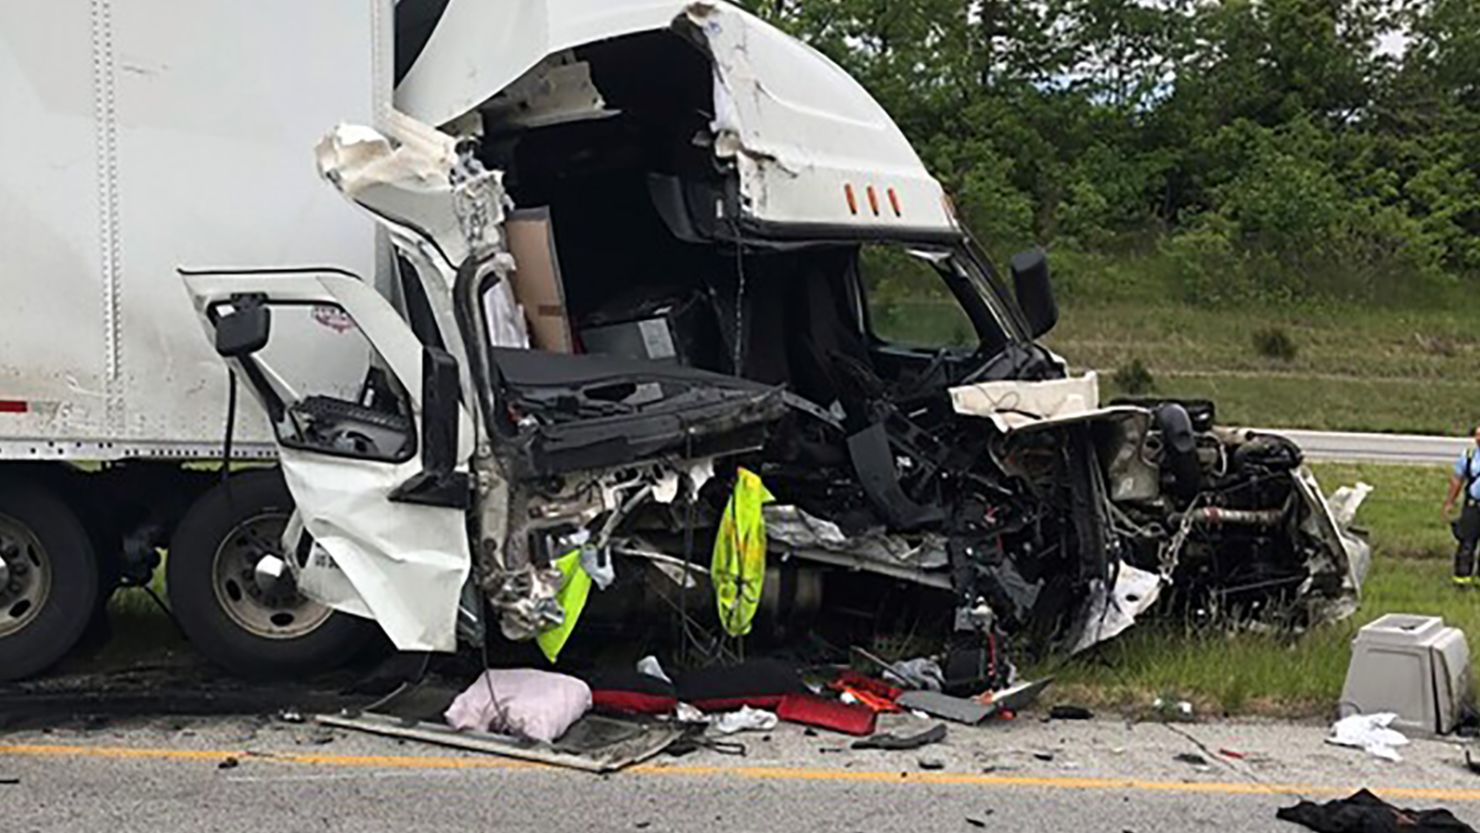 One person is dead, and two others were hospitalized after a crash involving three semi-tractor trailers and four cars on I-70 near Indianapolis Saturday afternoon, according to Indiana State Police.